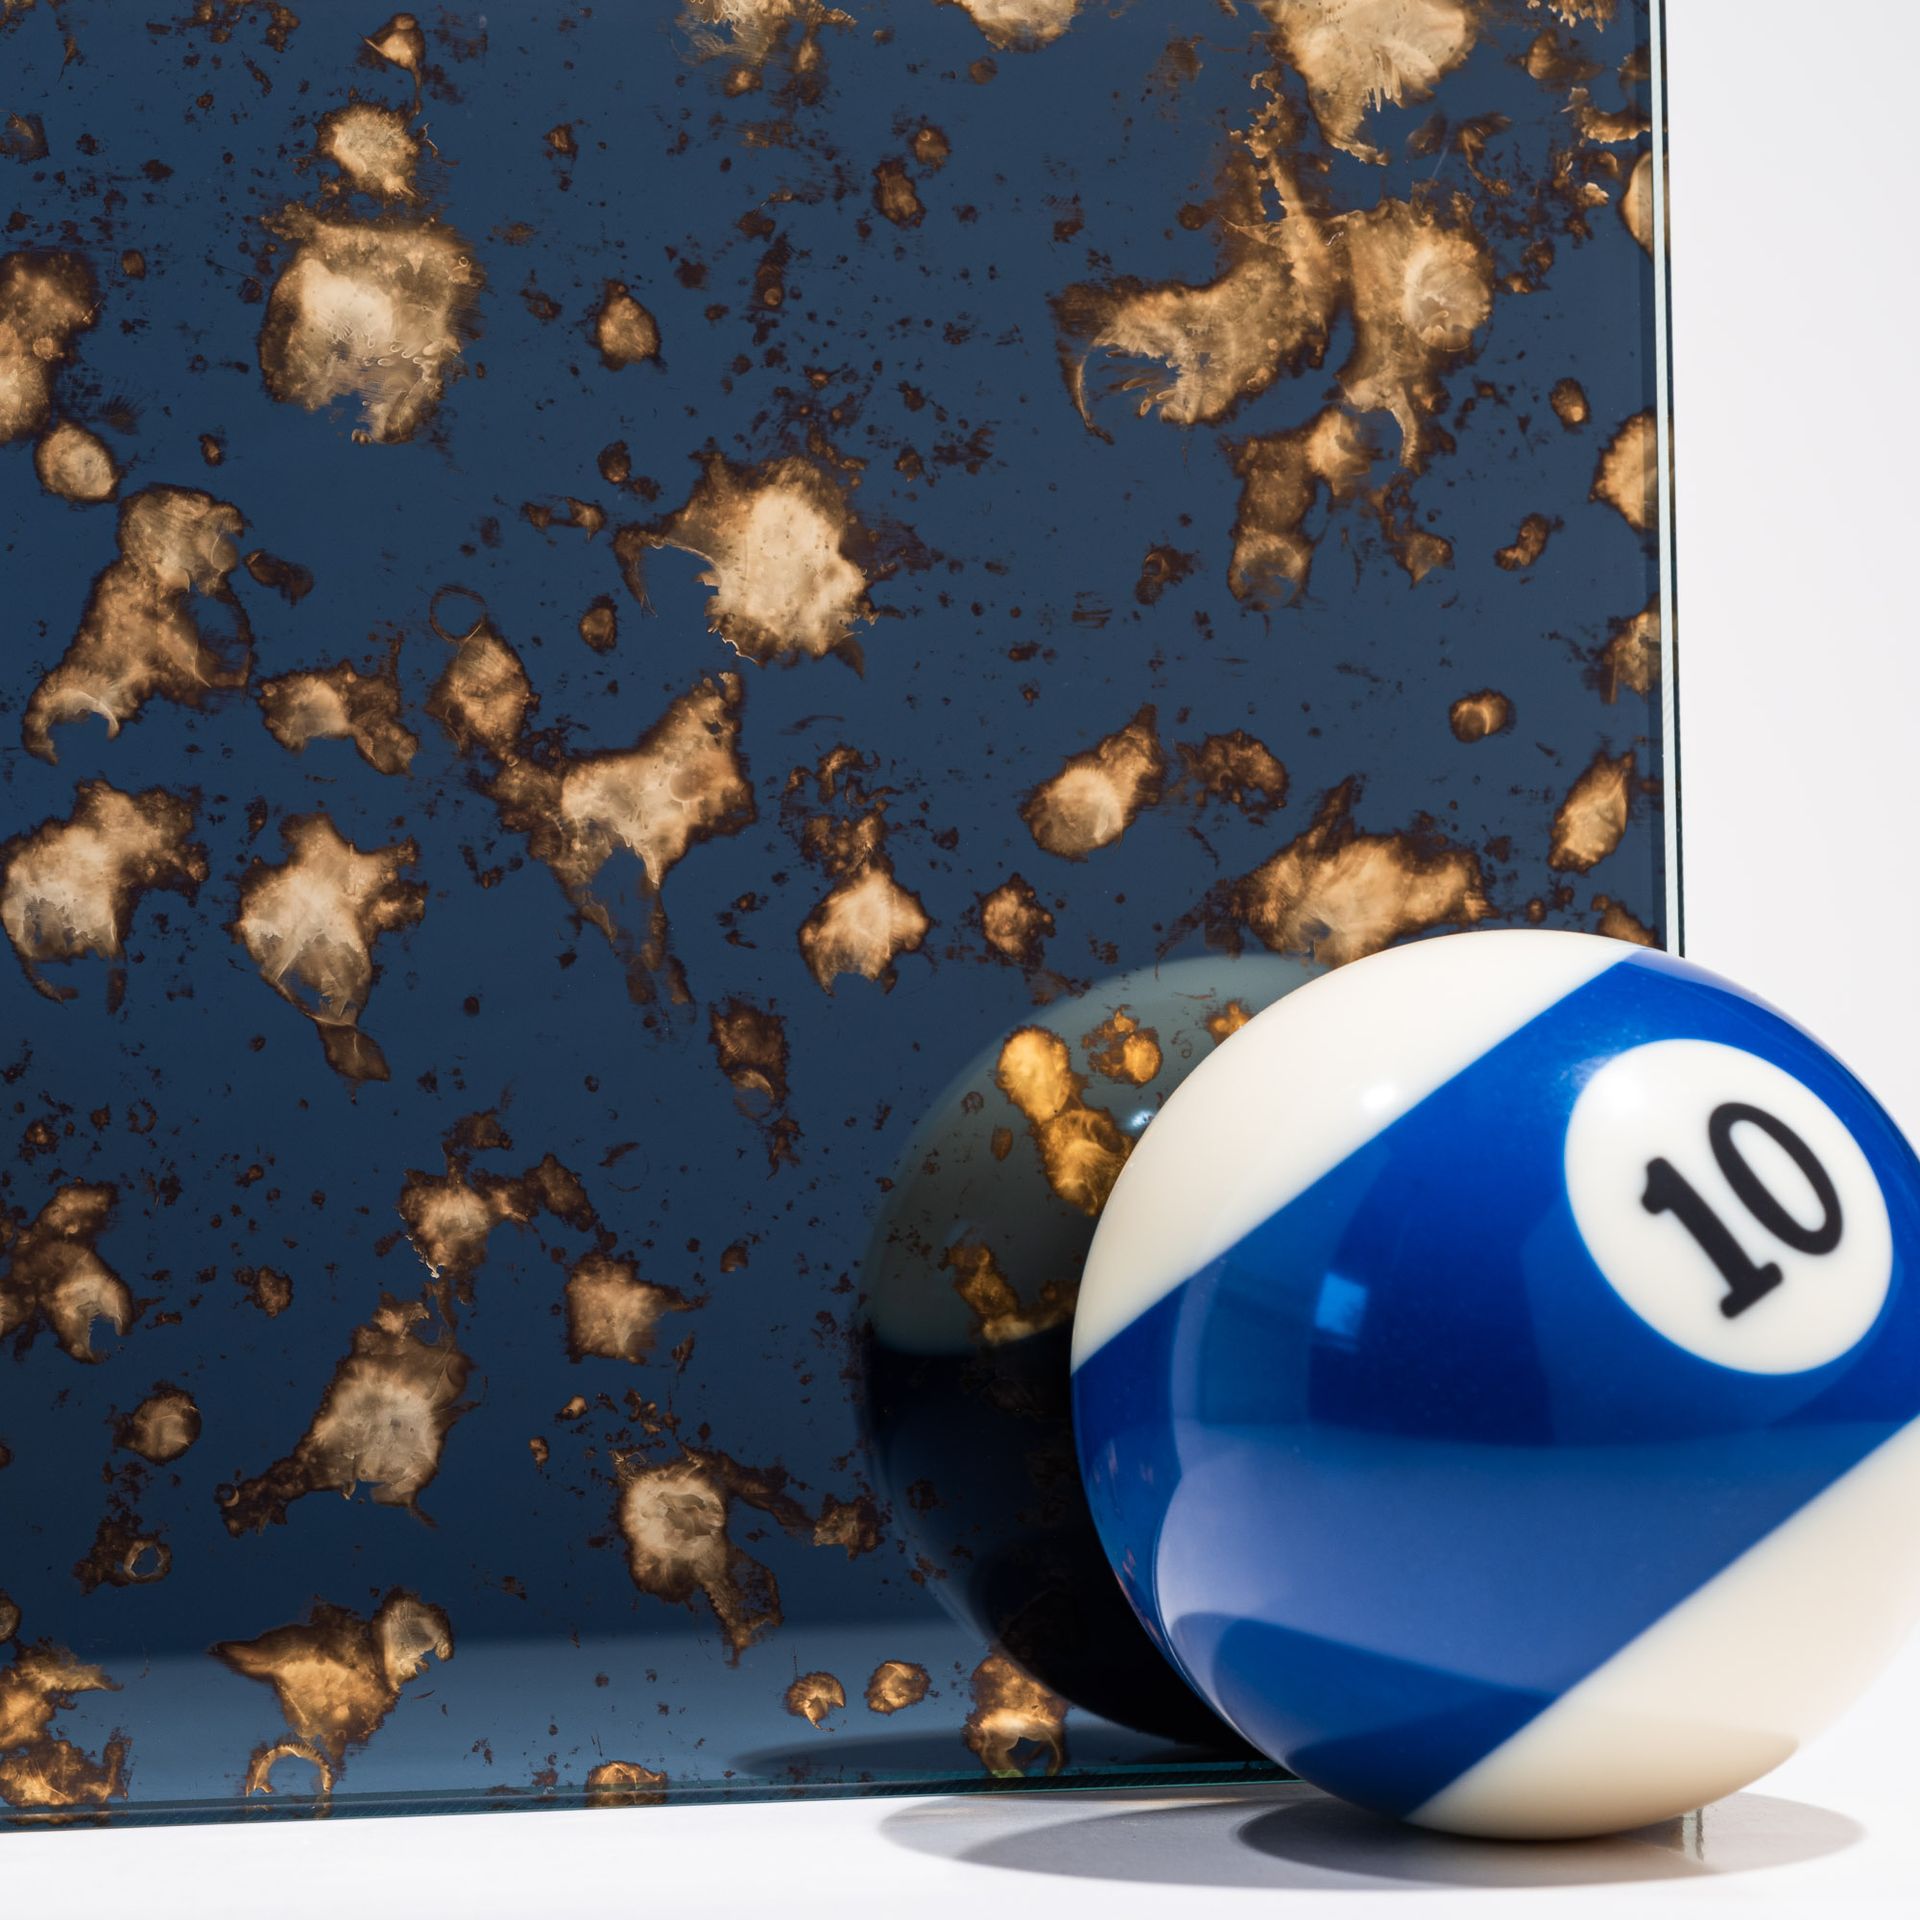 Billiard ball in front of a gold and blue antique mirror finish